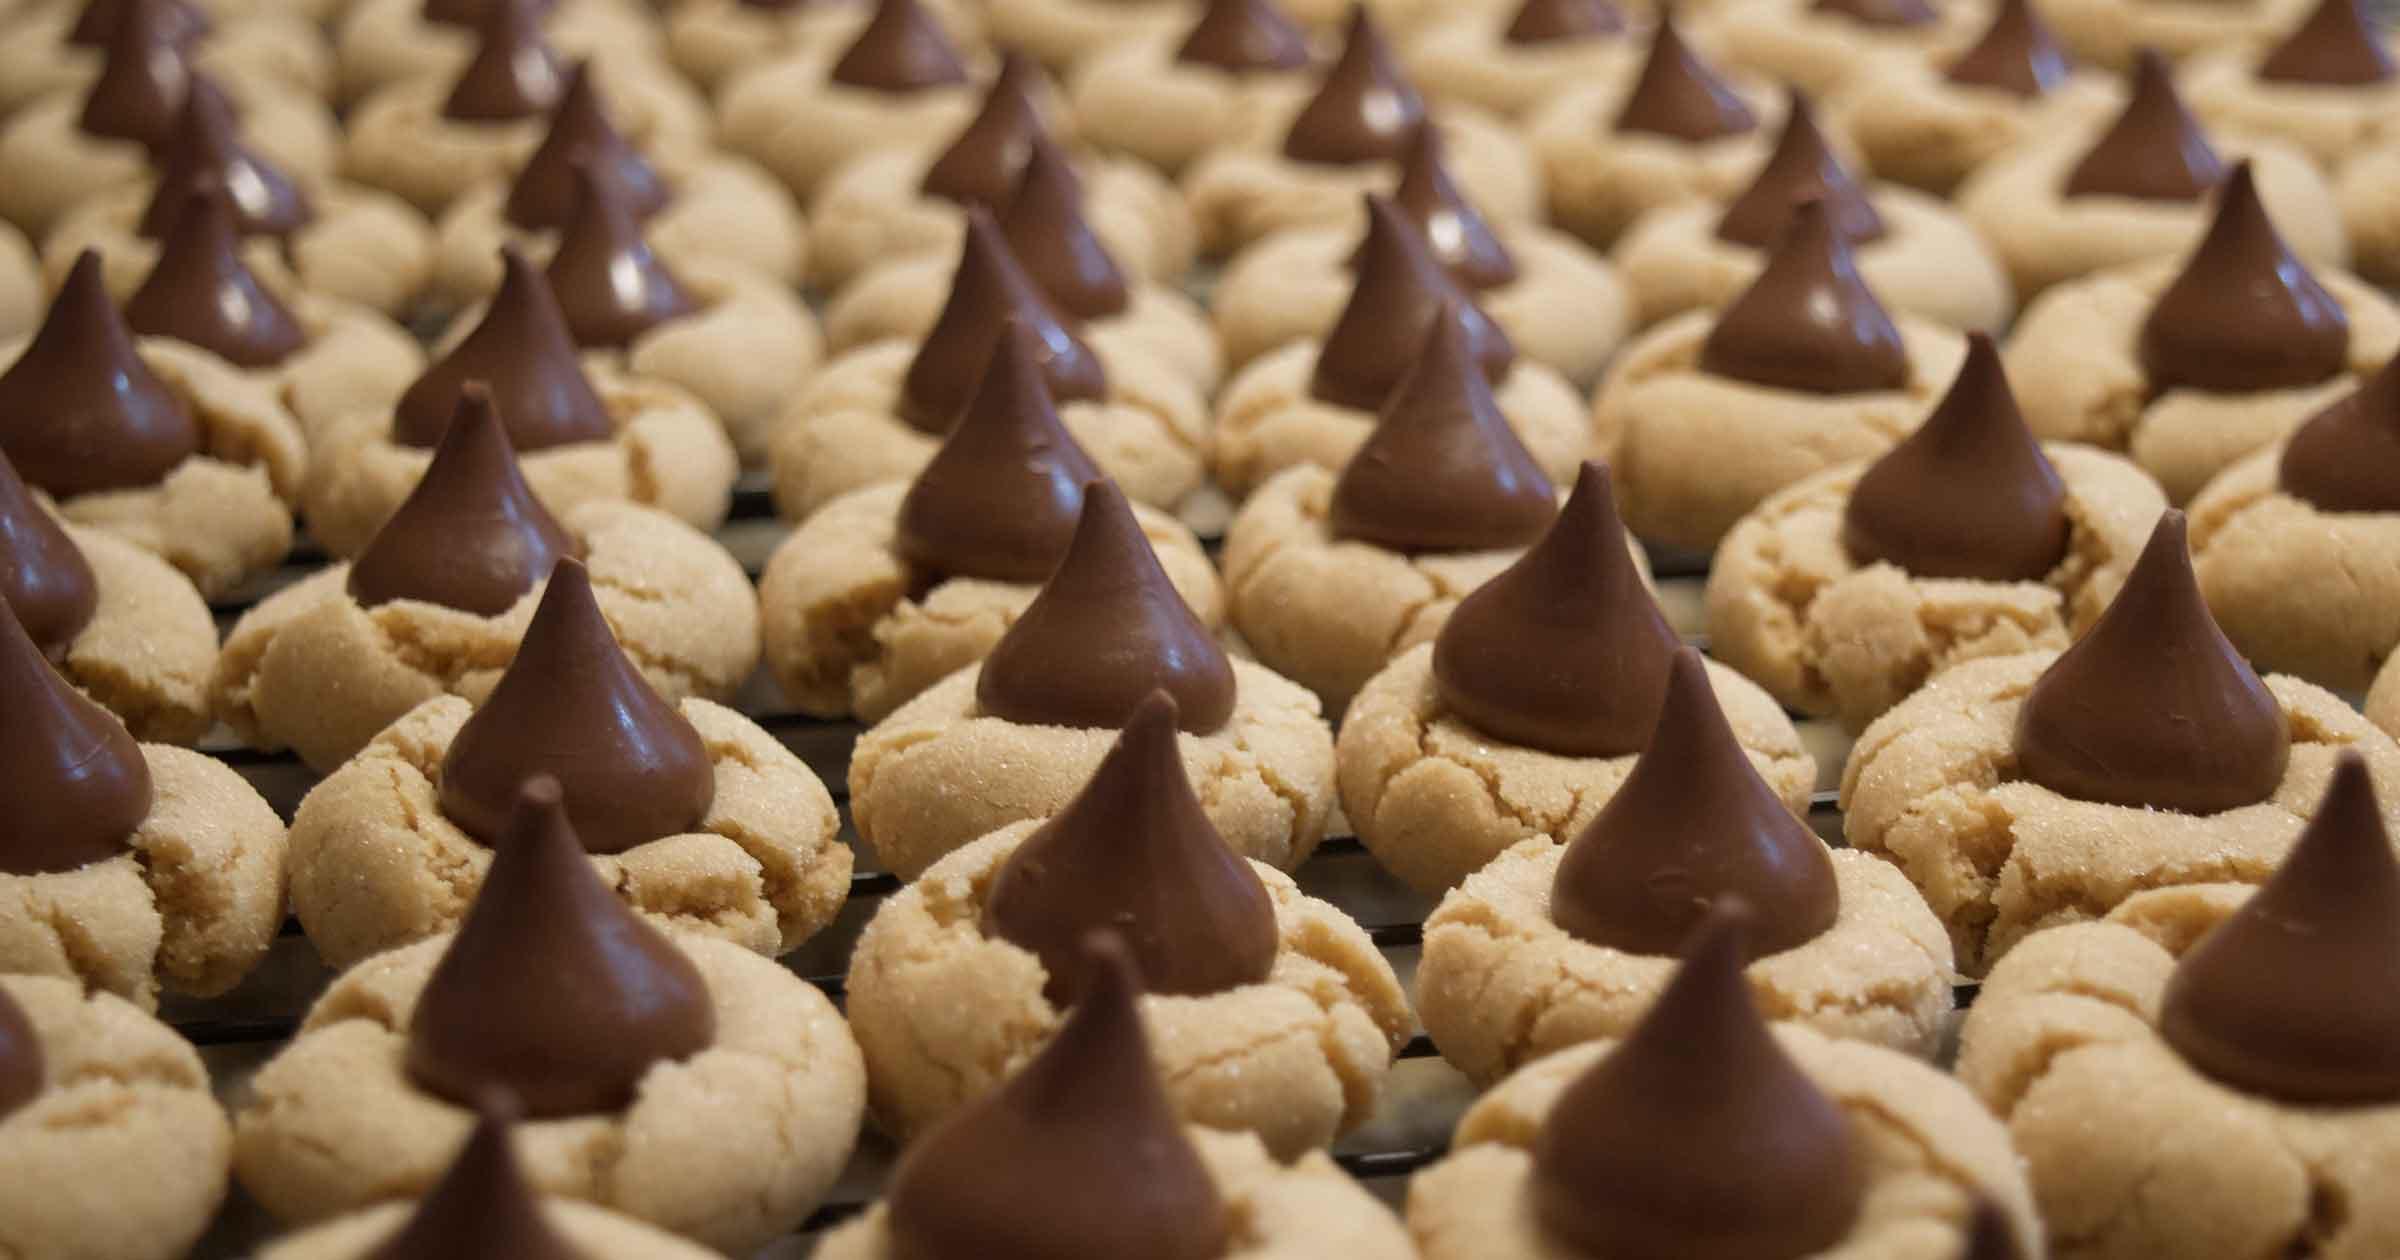 Dozens of soft-looking circular cookies with Hershey kisses in the center